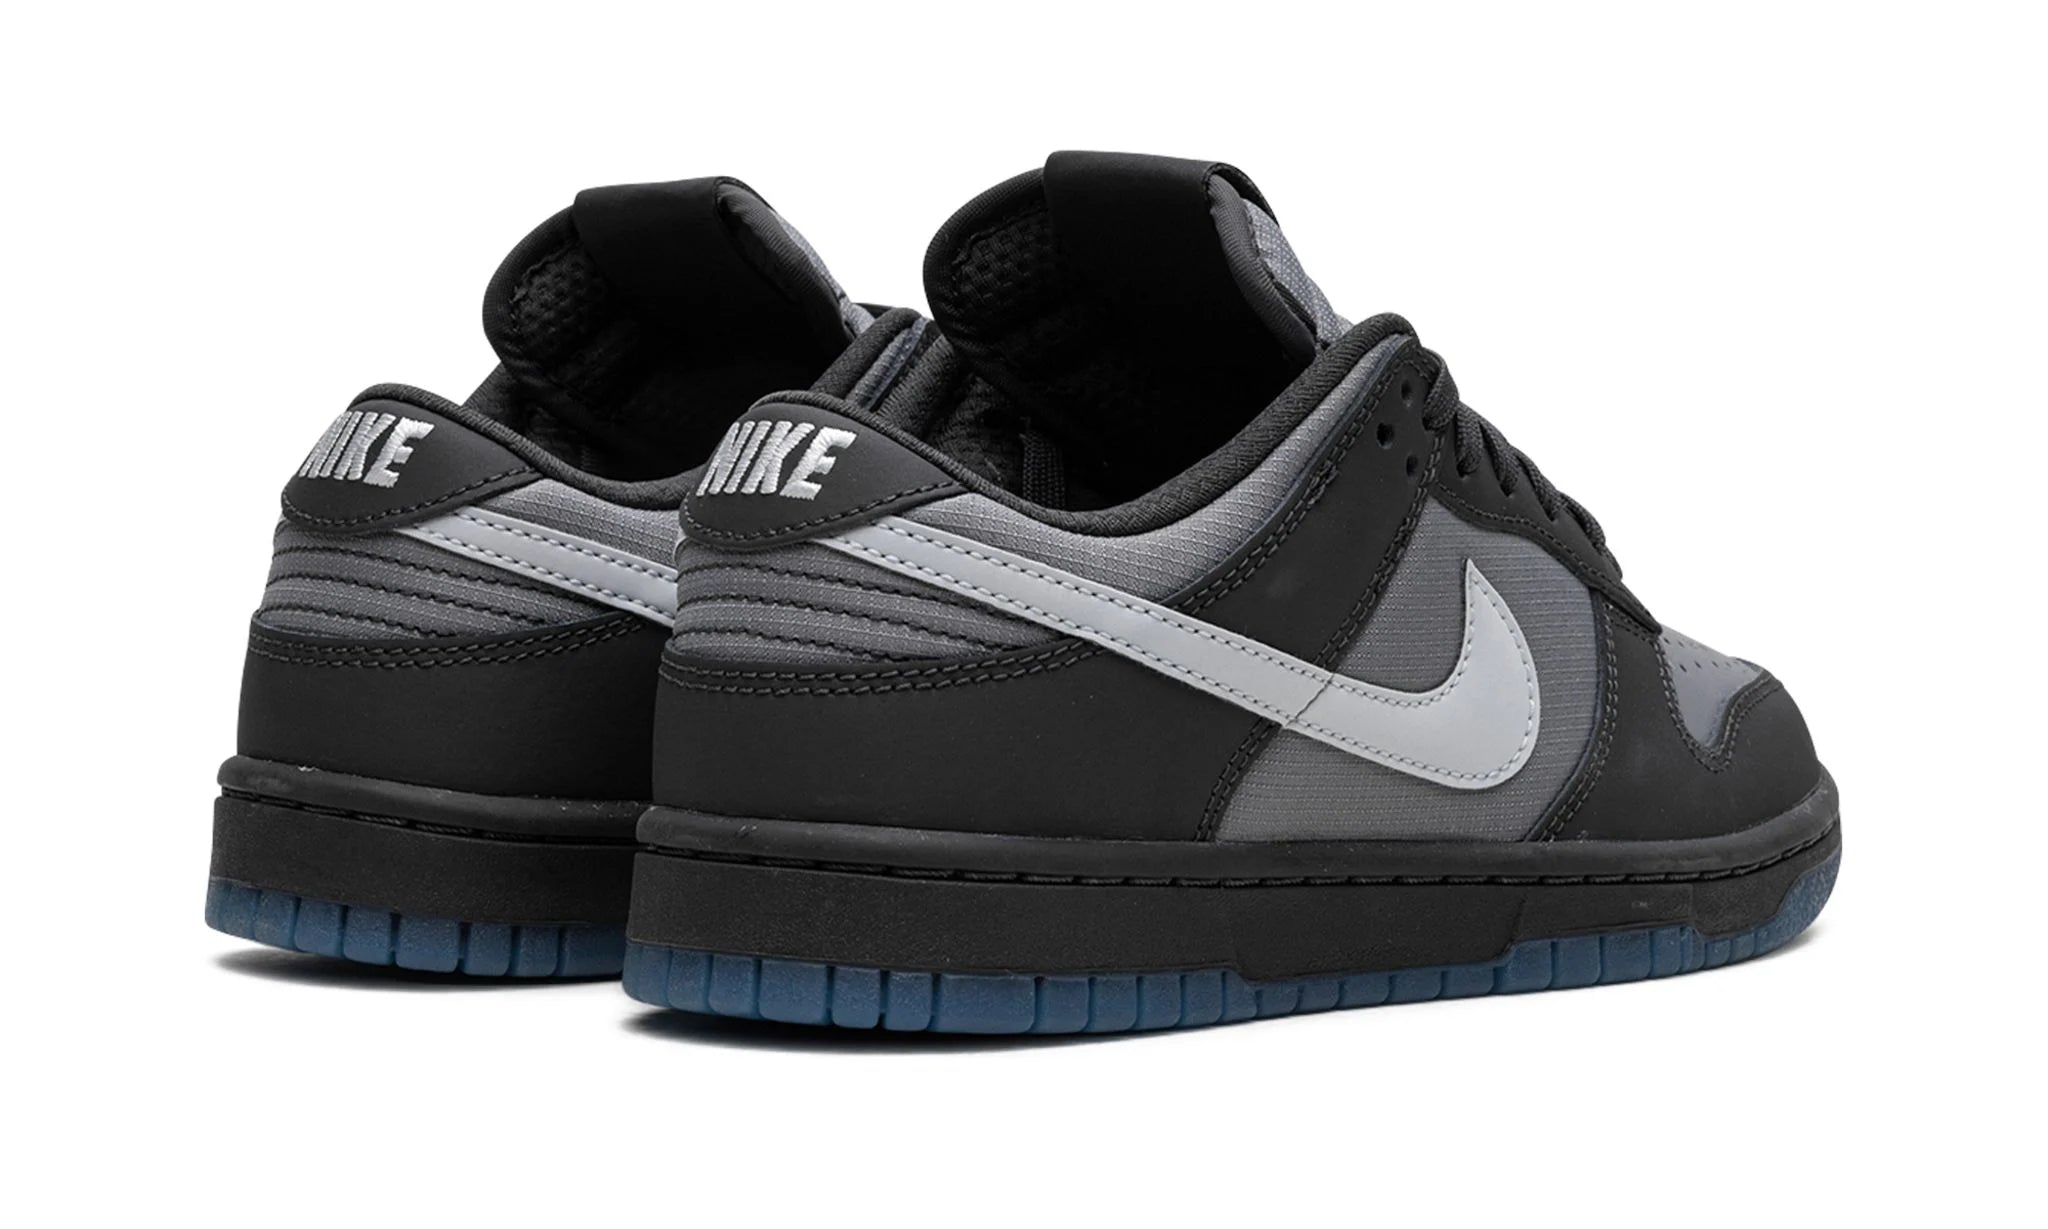 NIKE DUNK LOW "Anthracite"